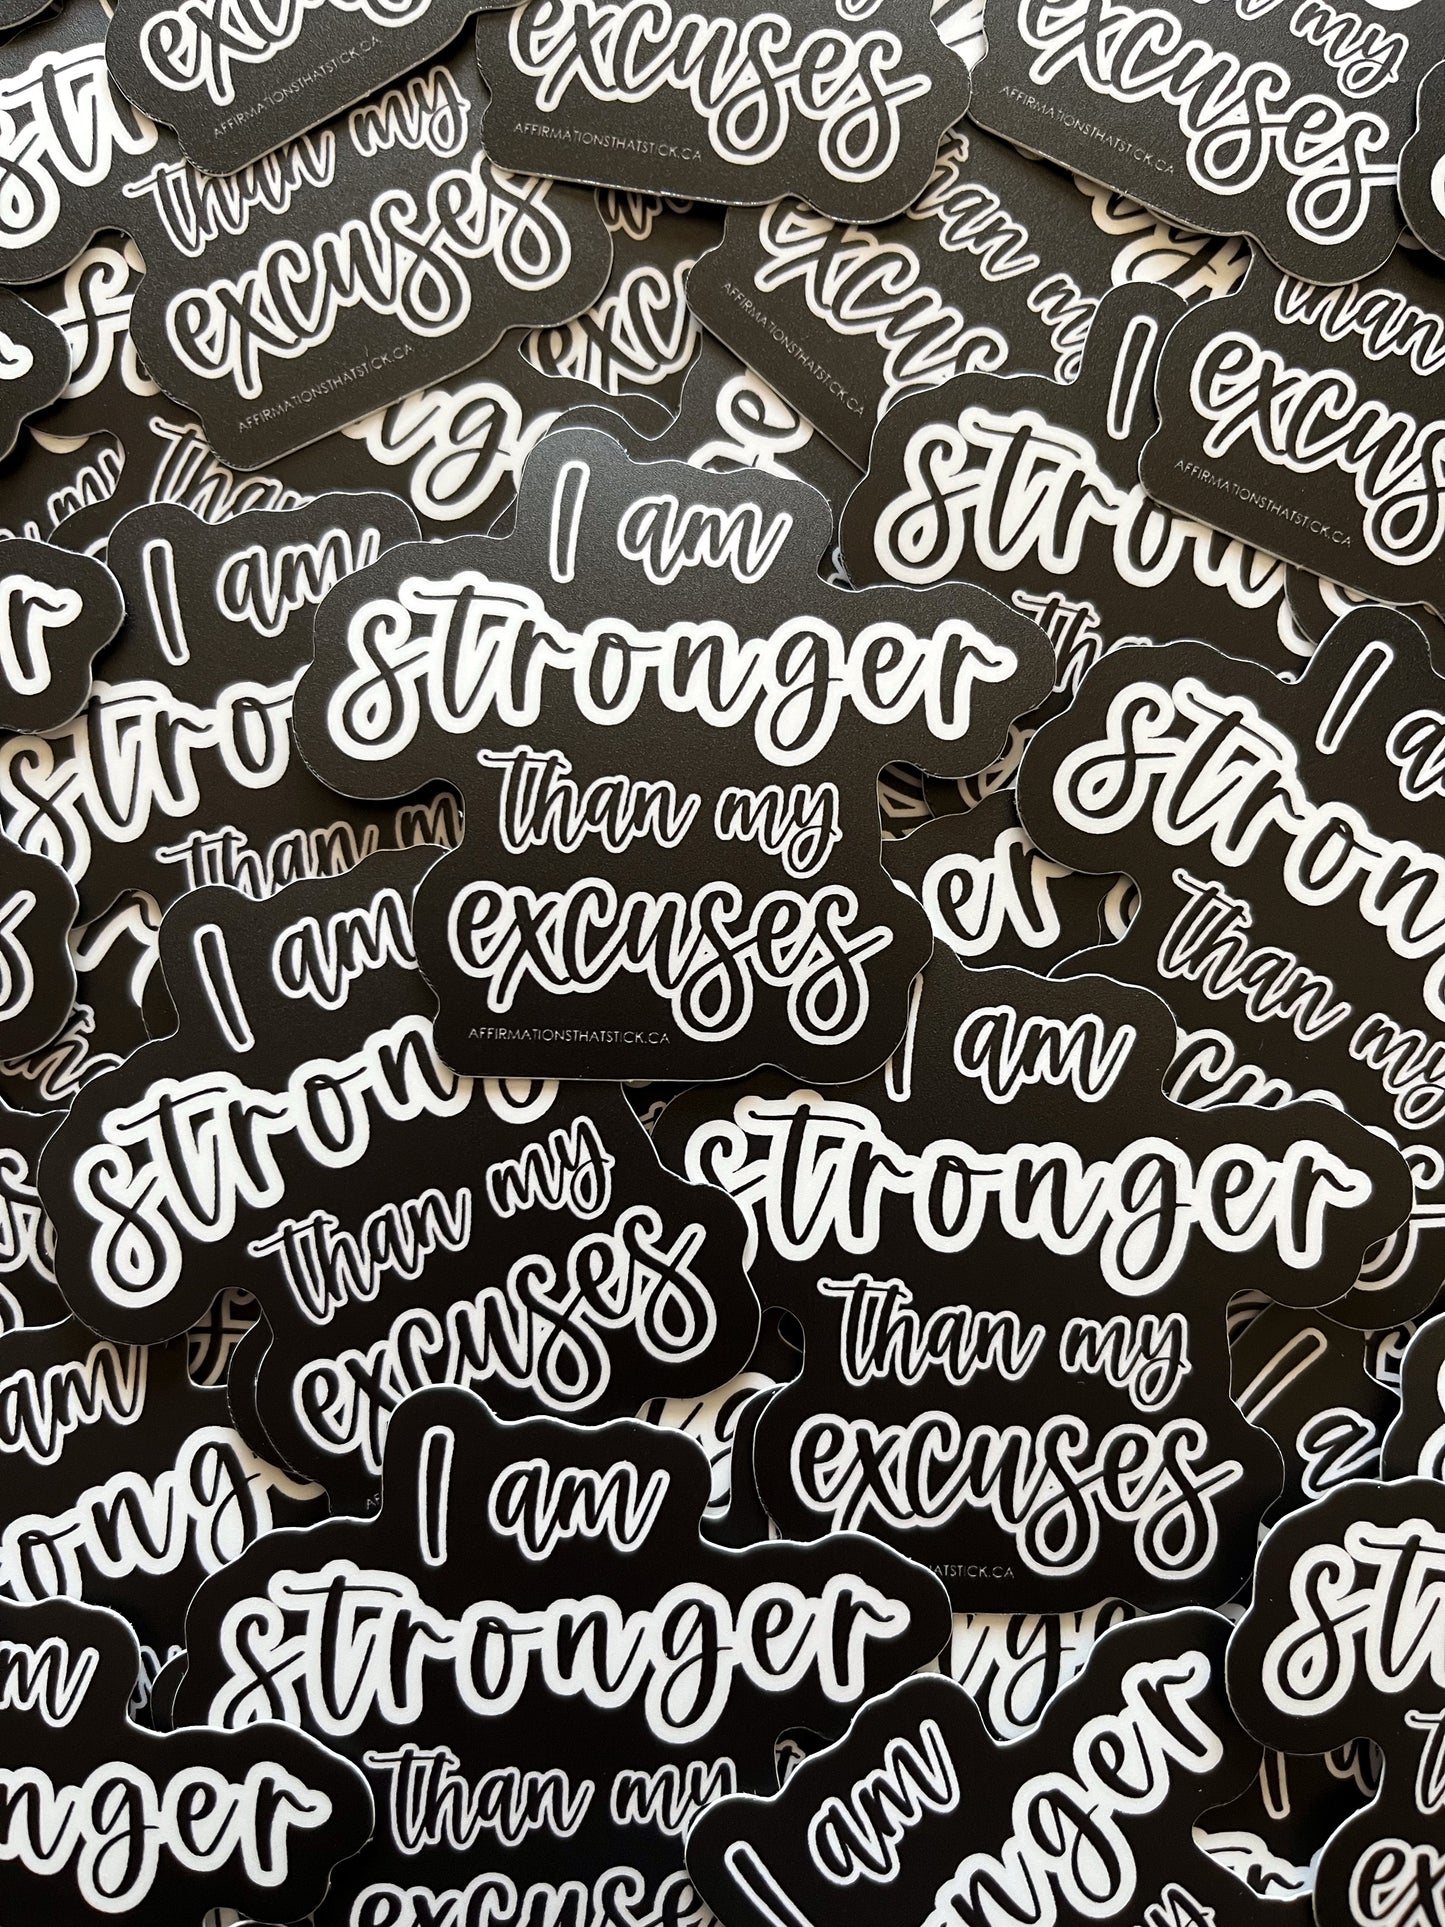 Stronger than my excuses Affirmation Sticker-Affirmations That Stick CA